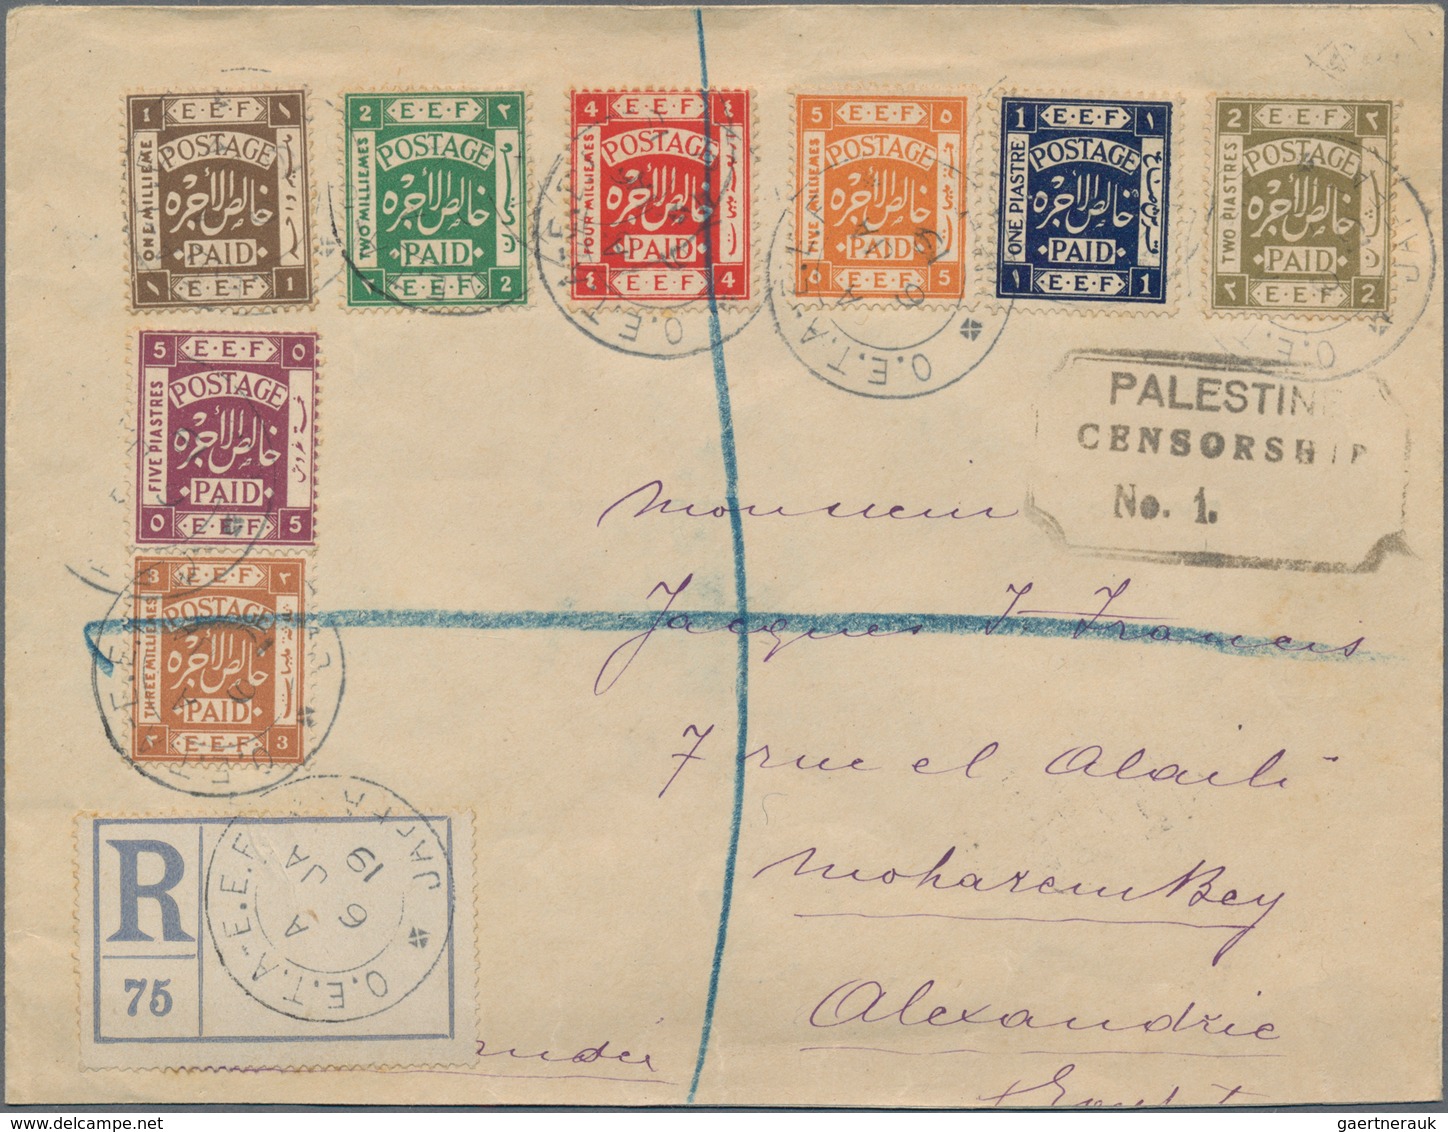 Palästina: 1890/1961, Palestine/Israel, collection of apprx. 150 covers/cards in two albums, from so